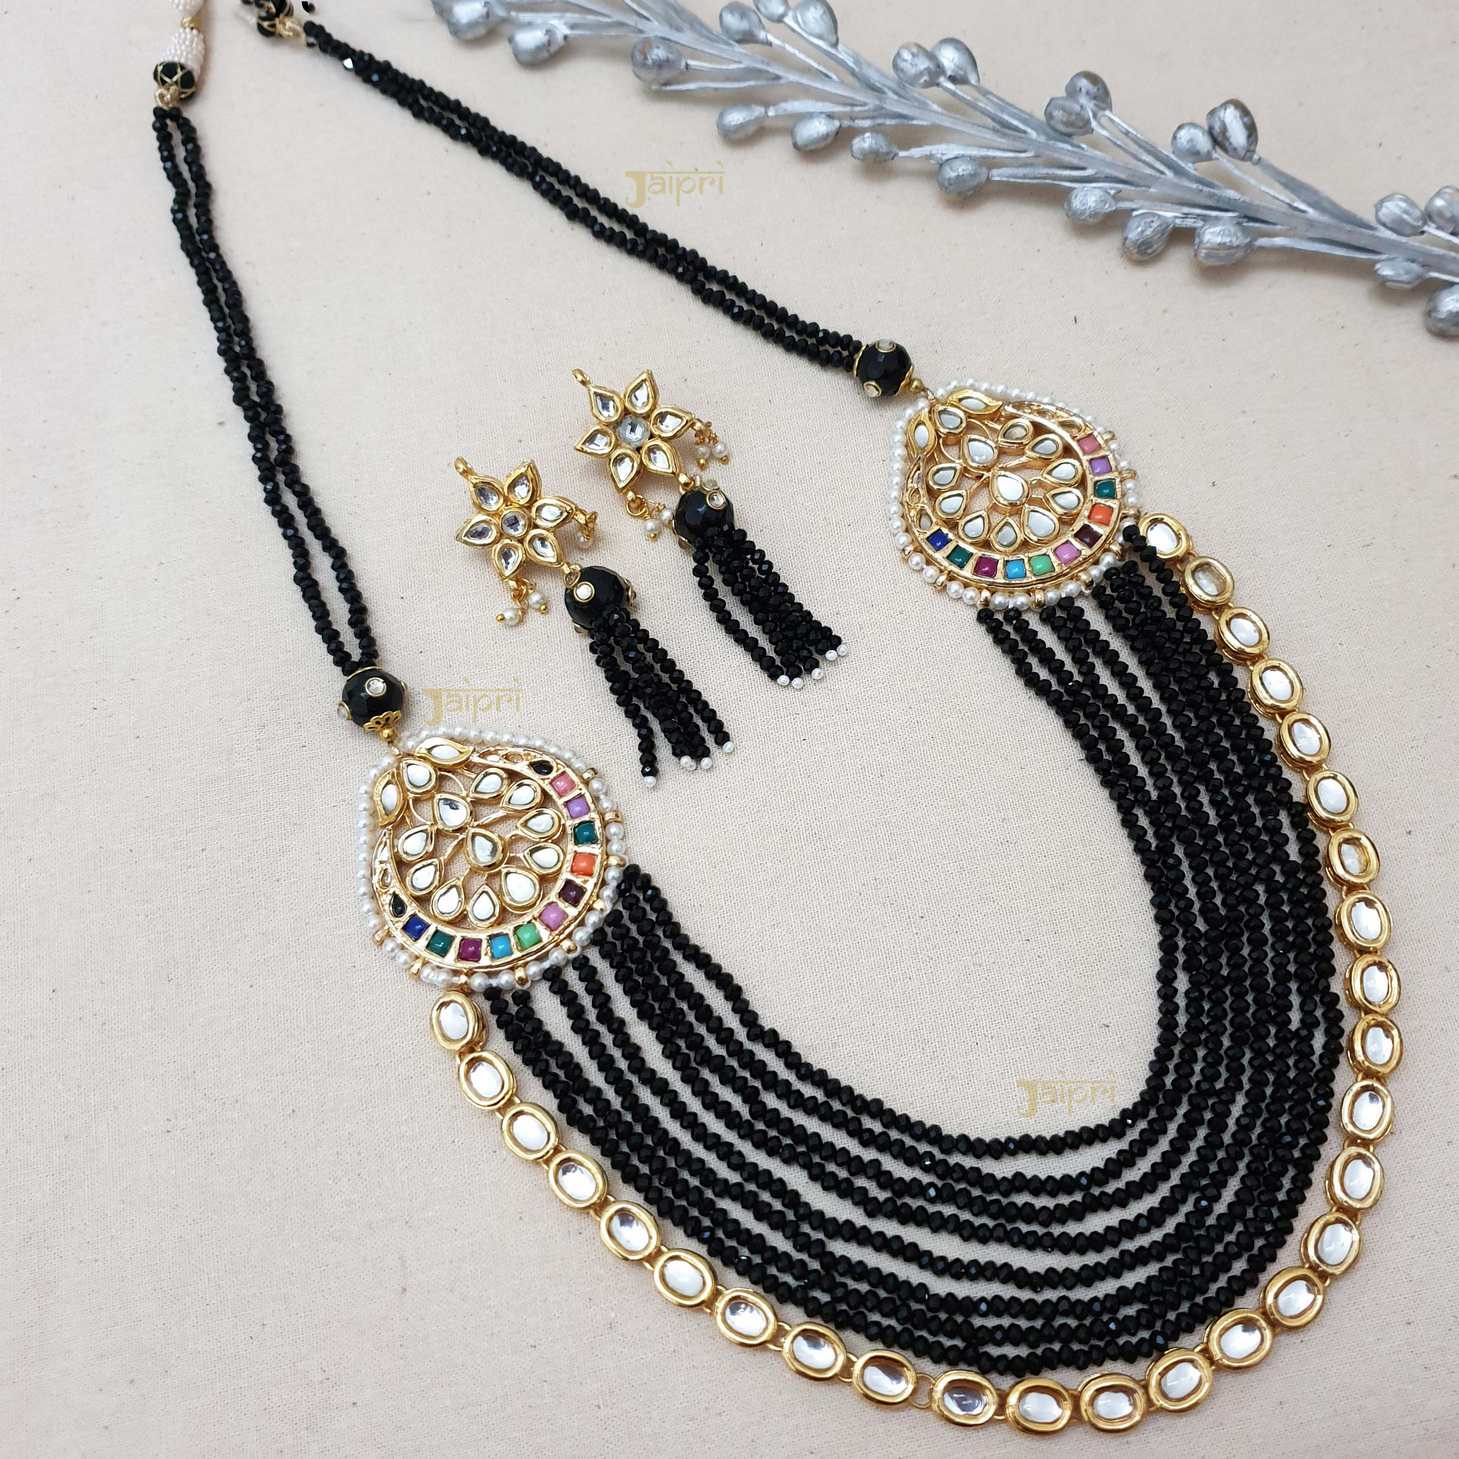 Designer Kundan & Black Beads Stone Gold Necklace With Earrings